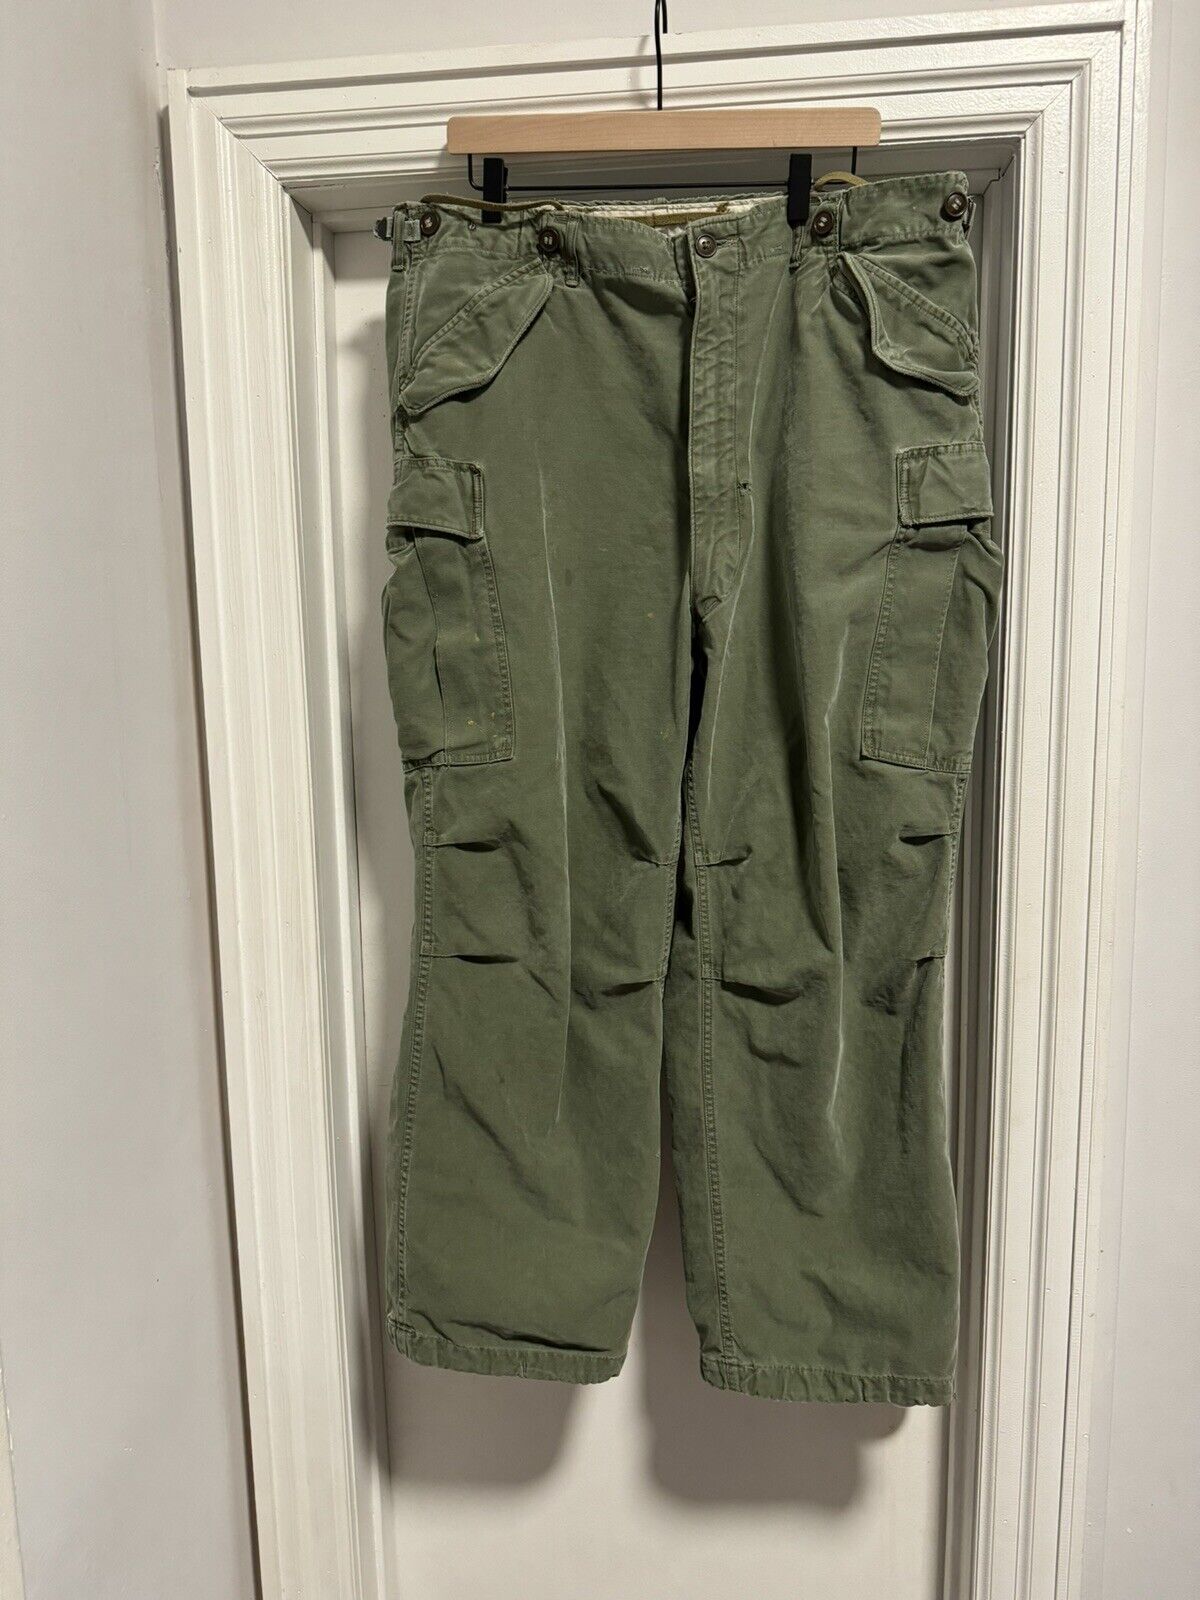 Vintage M51 Field Trousers Shell M-1951 Army Military Pants Green Large Regular